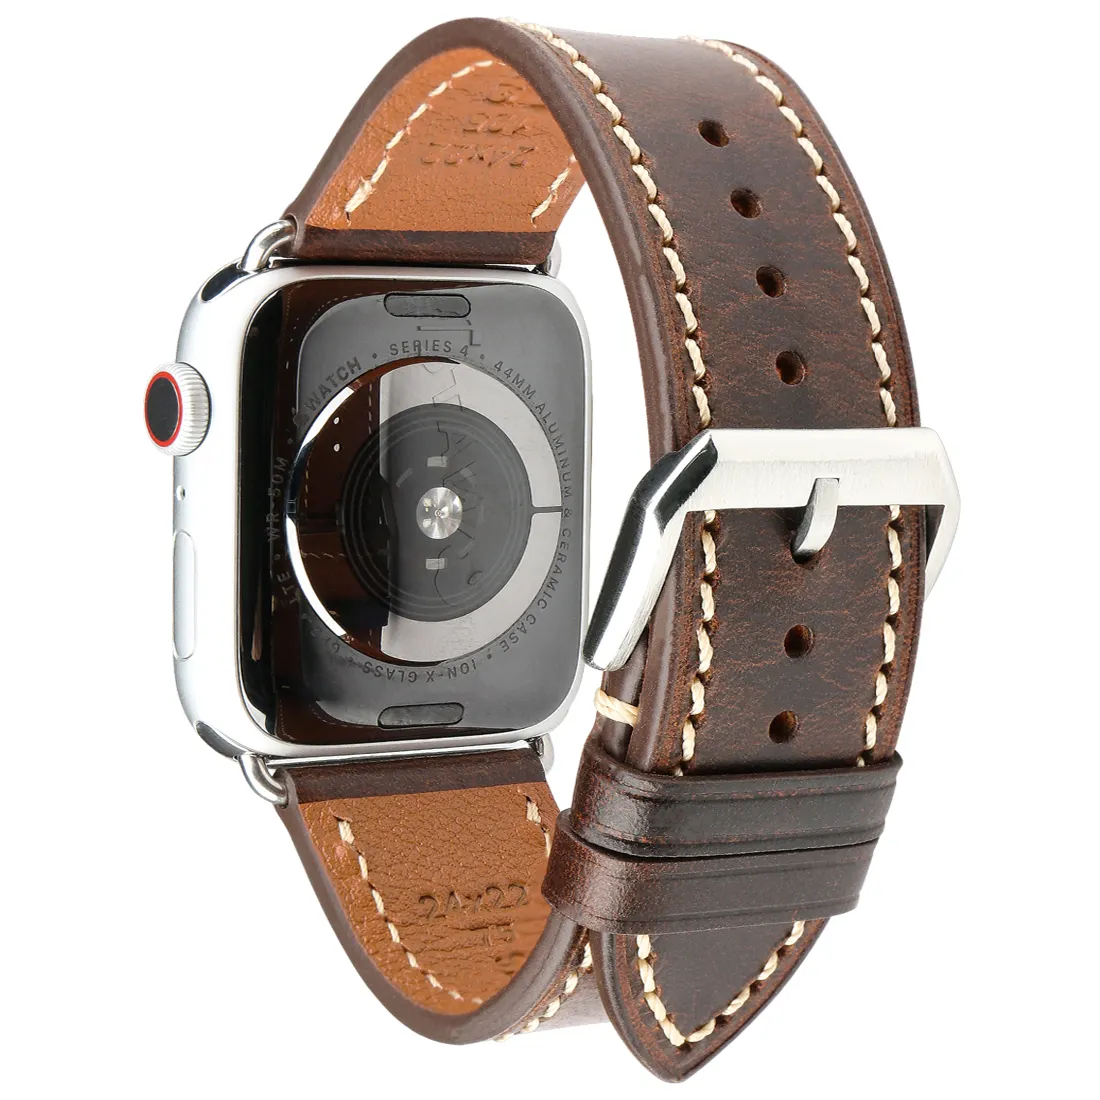 Small MOQ Men Woman Cow Leather Watch Straps for Apple Watch iWatch Strap Band 44 40 42 38mm Brown Smart Watch Leather Strap